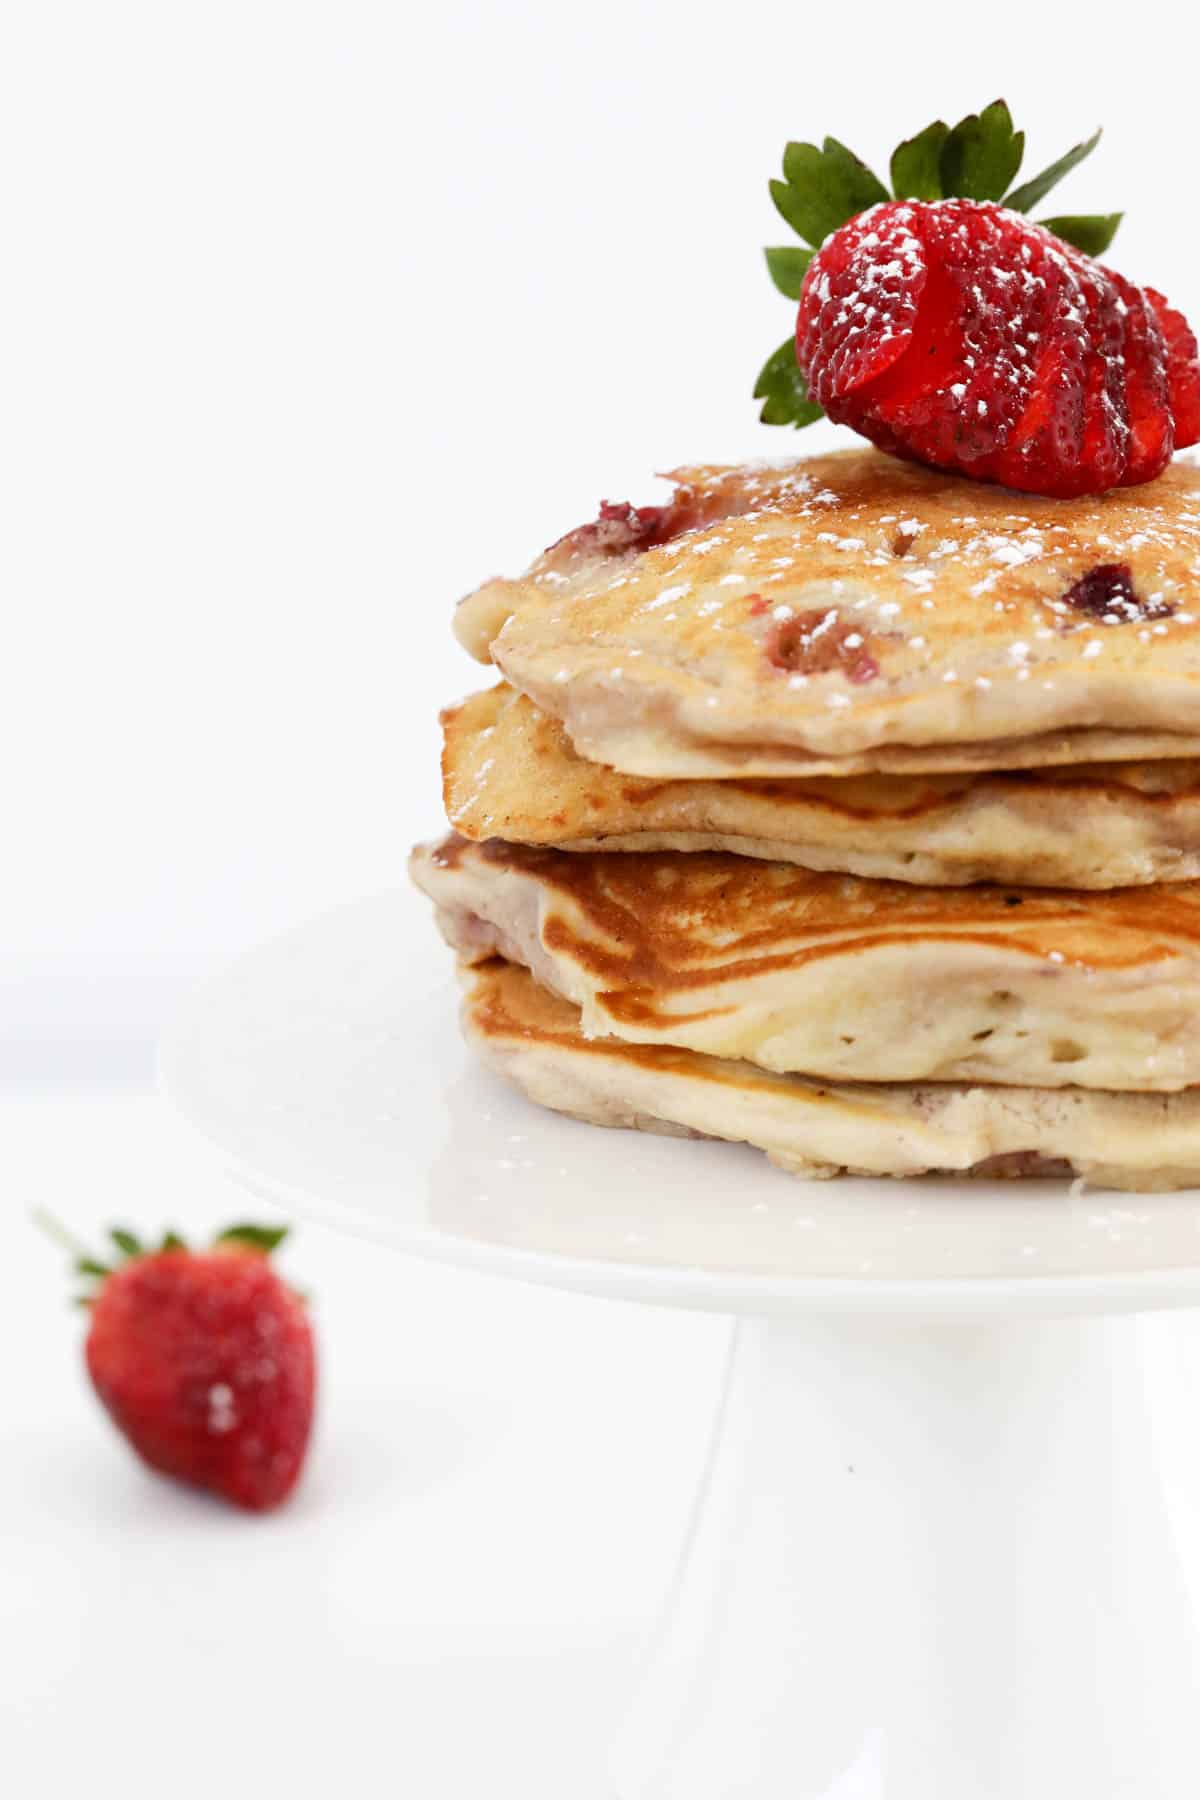 Pancakes stacked on a cake stand with sliced strawberry on top.